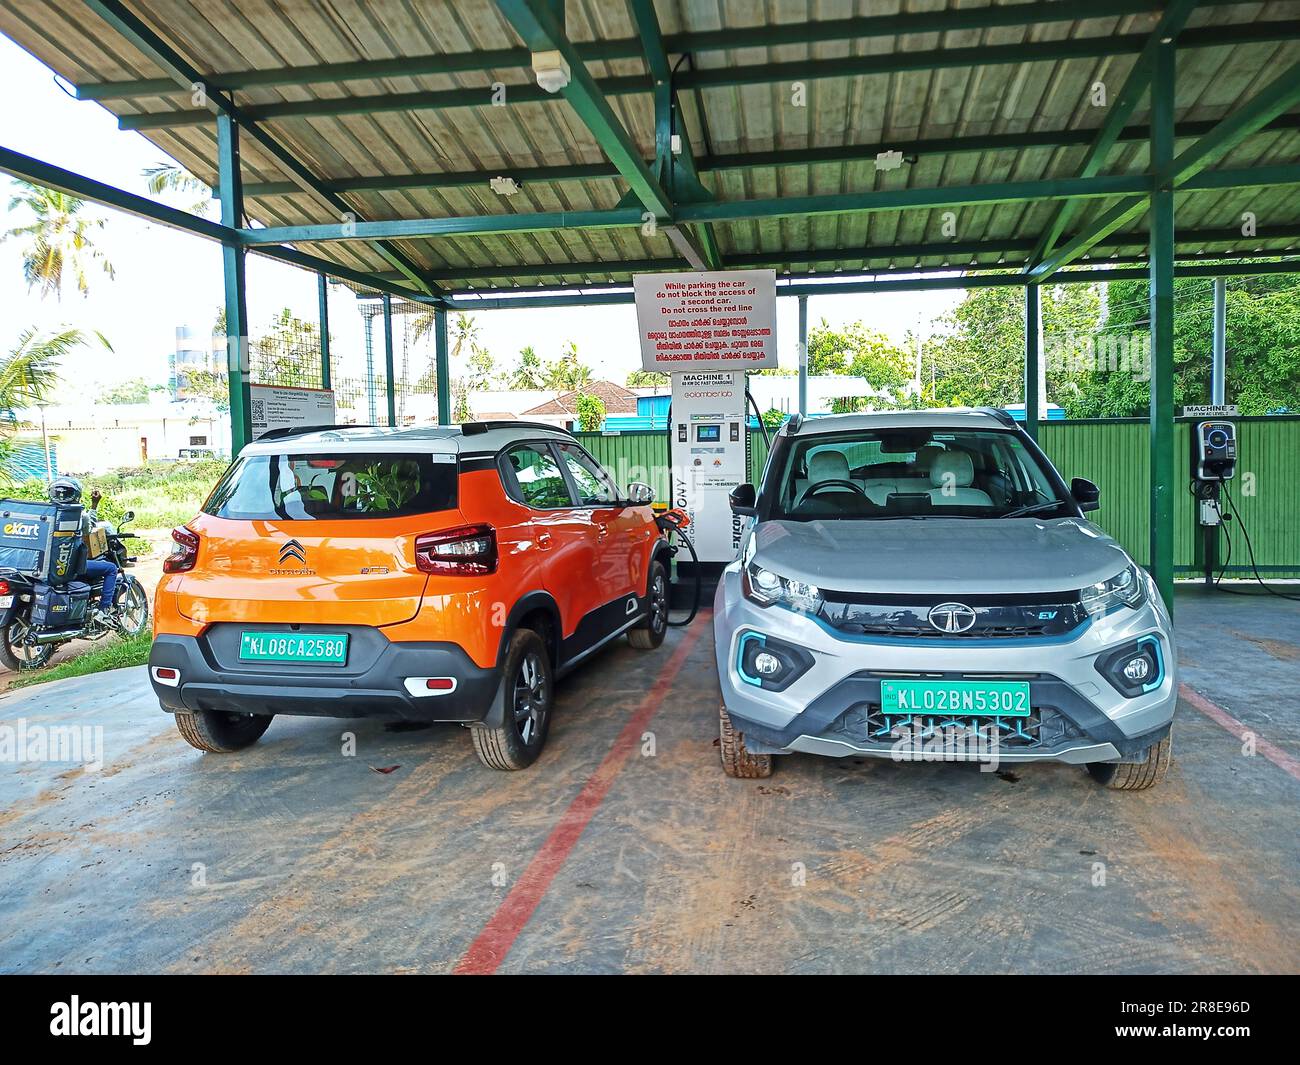 Electric vehicle charging in india,ev charging station india,india ev cars,ev charger in india,electric car charging station,ev station,citrroen e c3 Stock Photo